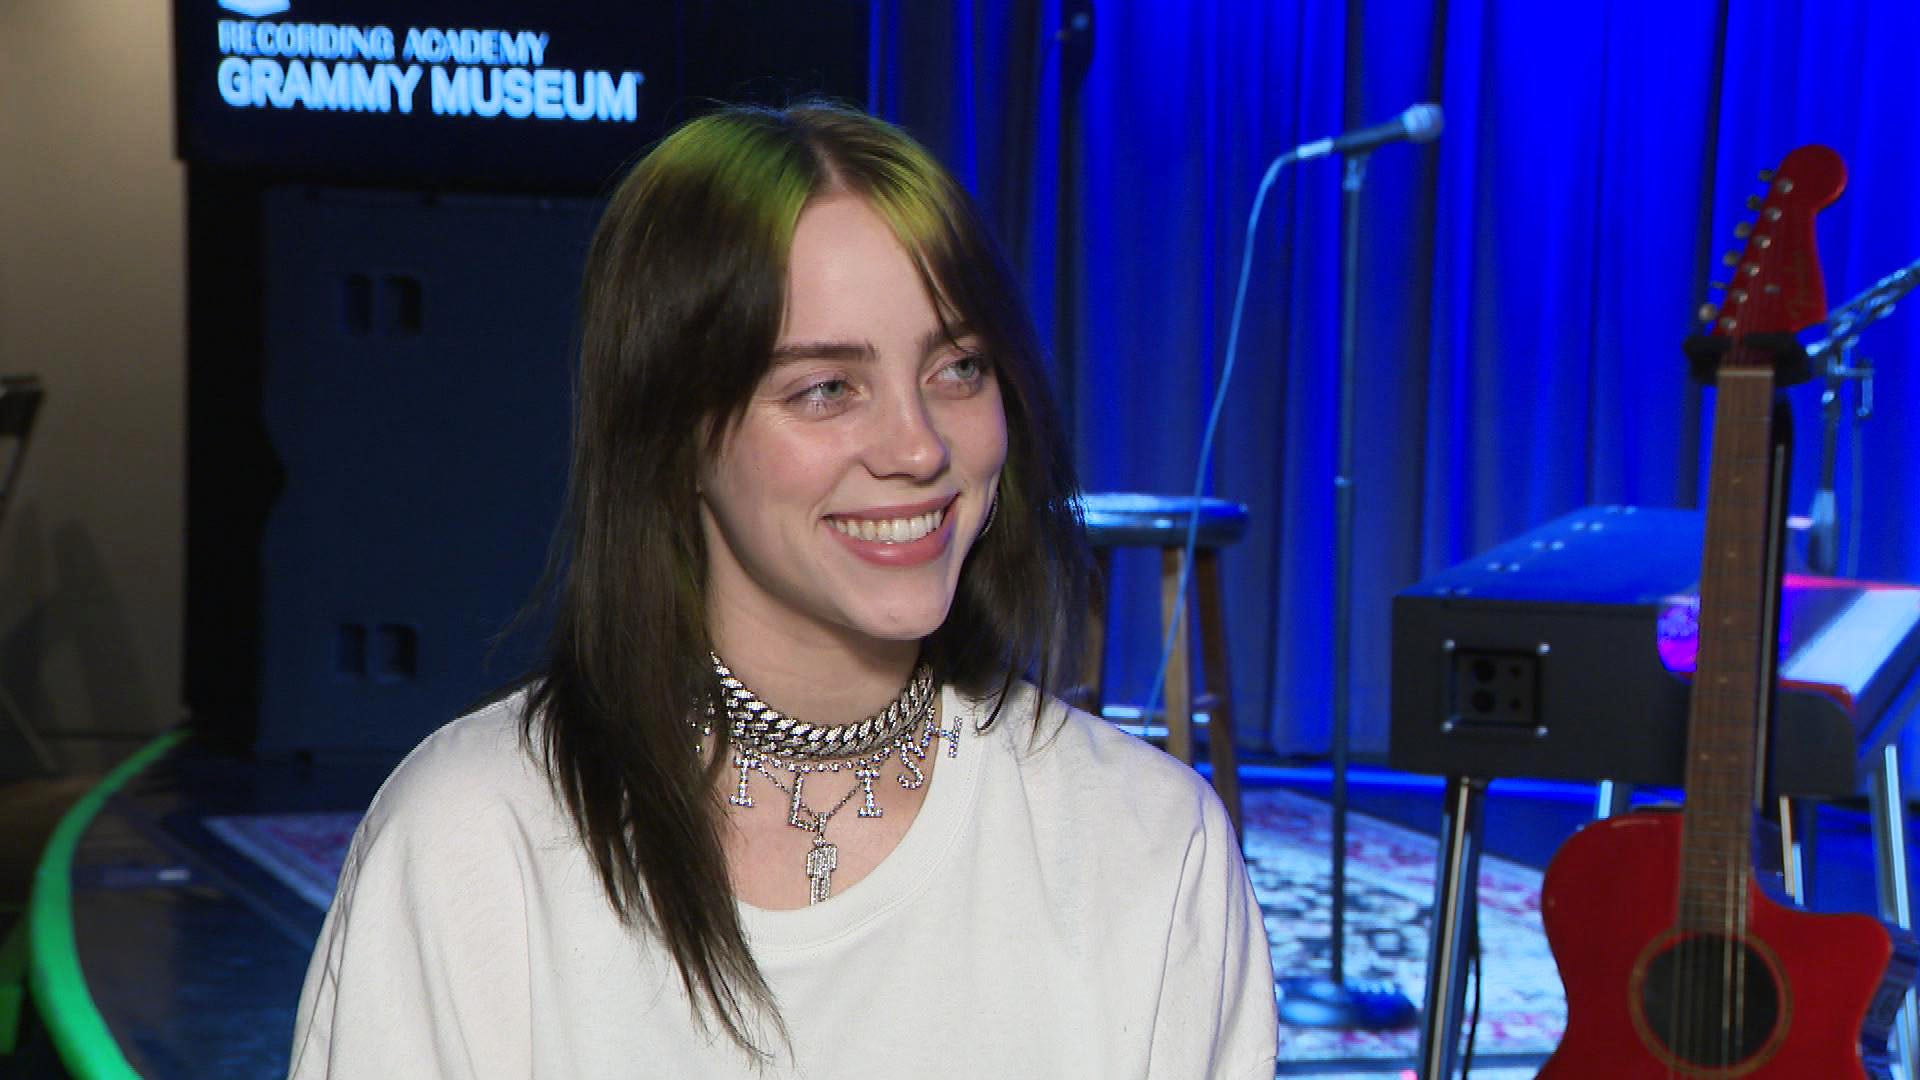 Flipboard: Billie Eilish on Turning 18 and Potential GRAMMY Nominations (Exclusive)1920 x 1080